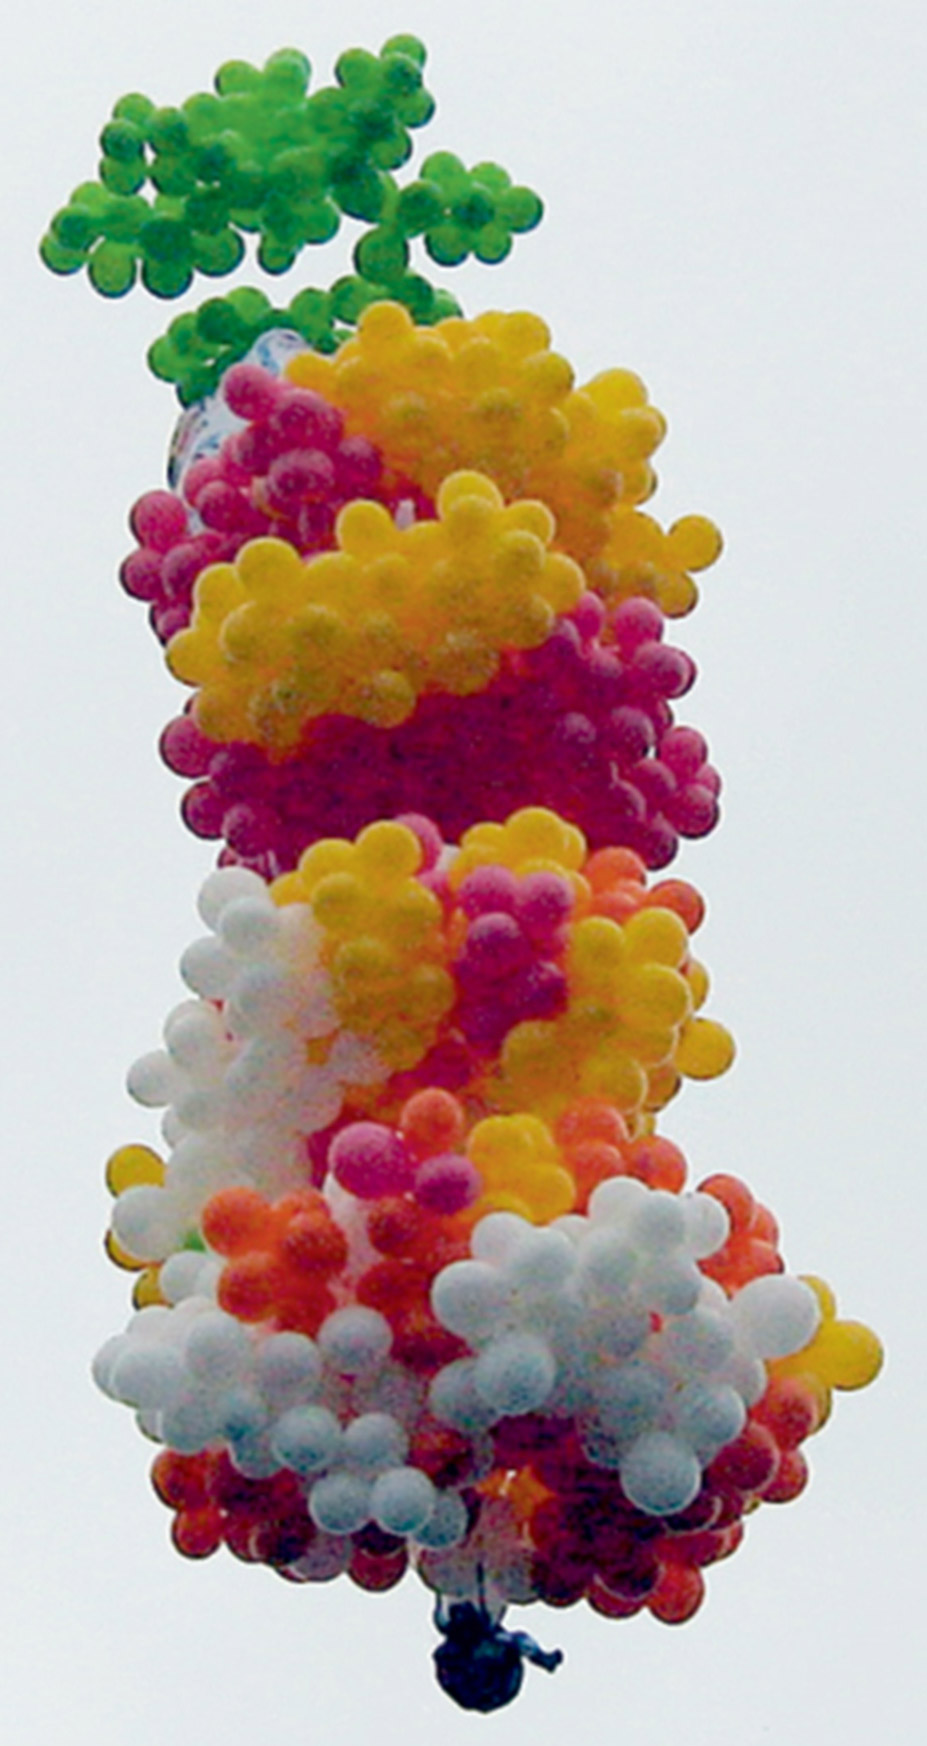 A photograph of Father Adelir Antonio de Carli on his balloon-assisted ascent.